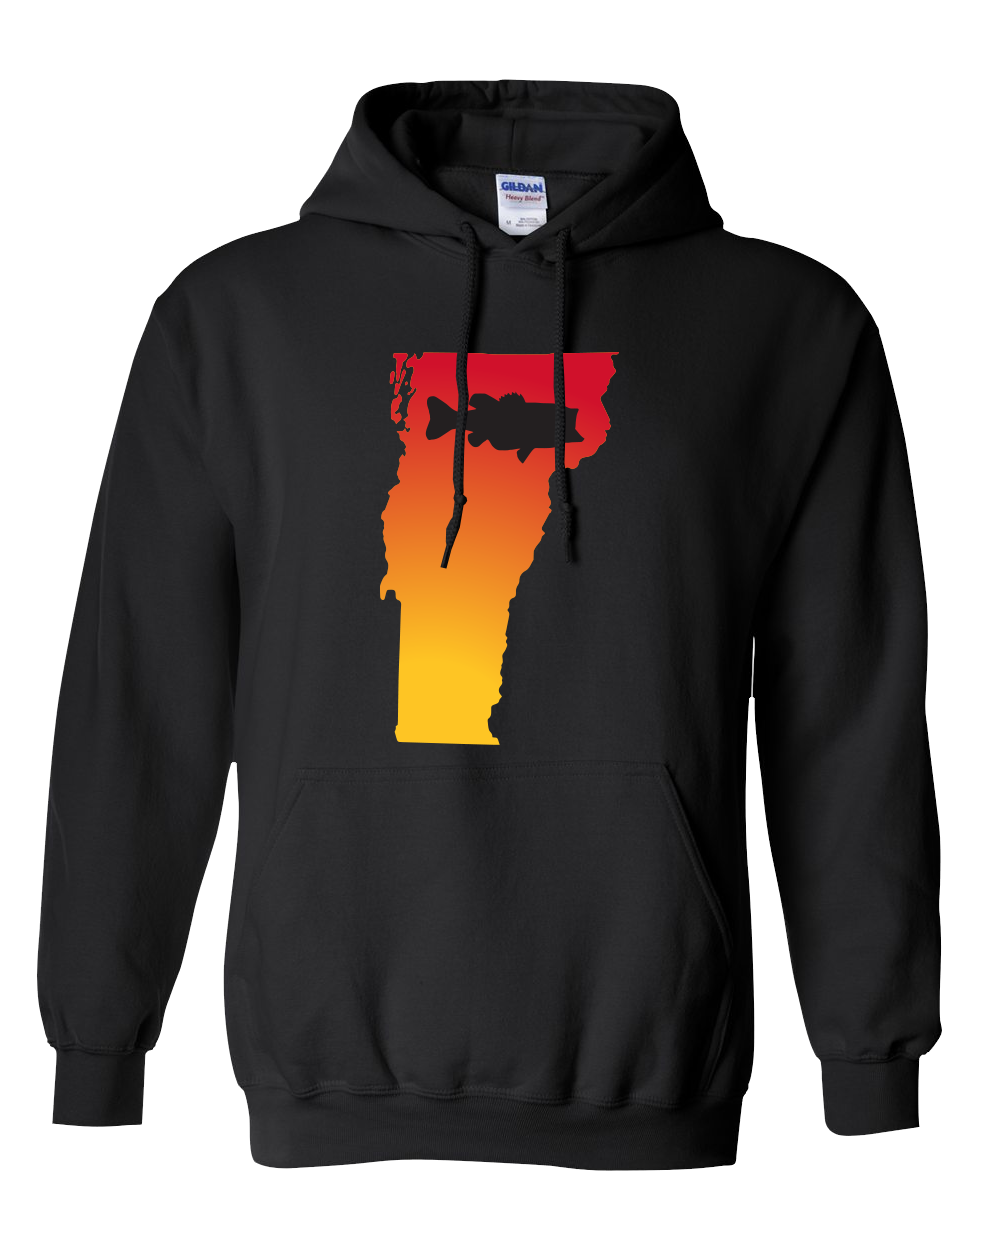 Pullover Hooded Sweatshirt Vermont Black Large Mouth Bass Vibrant Design High Quality Tight Knit Ring Spun Low Maintenance Cotton Printed With The Newest Available Color Transfer Technology